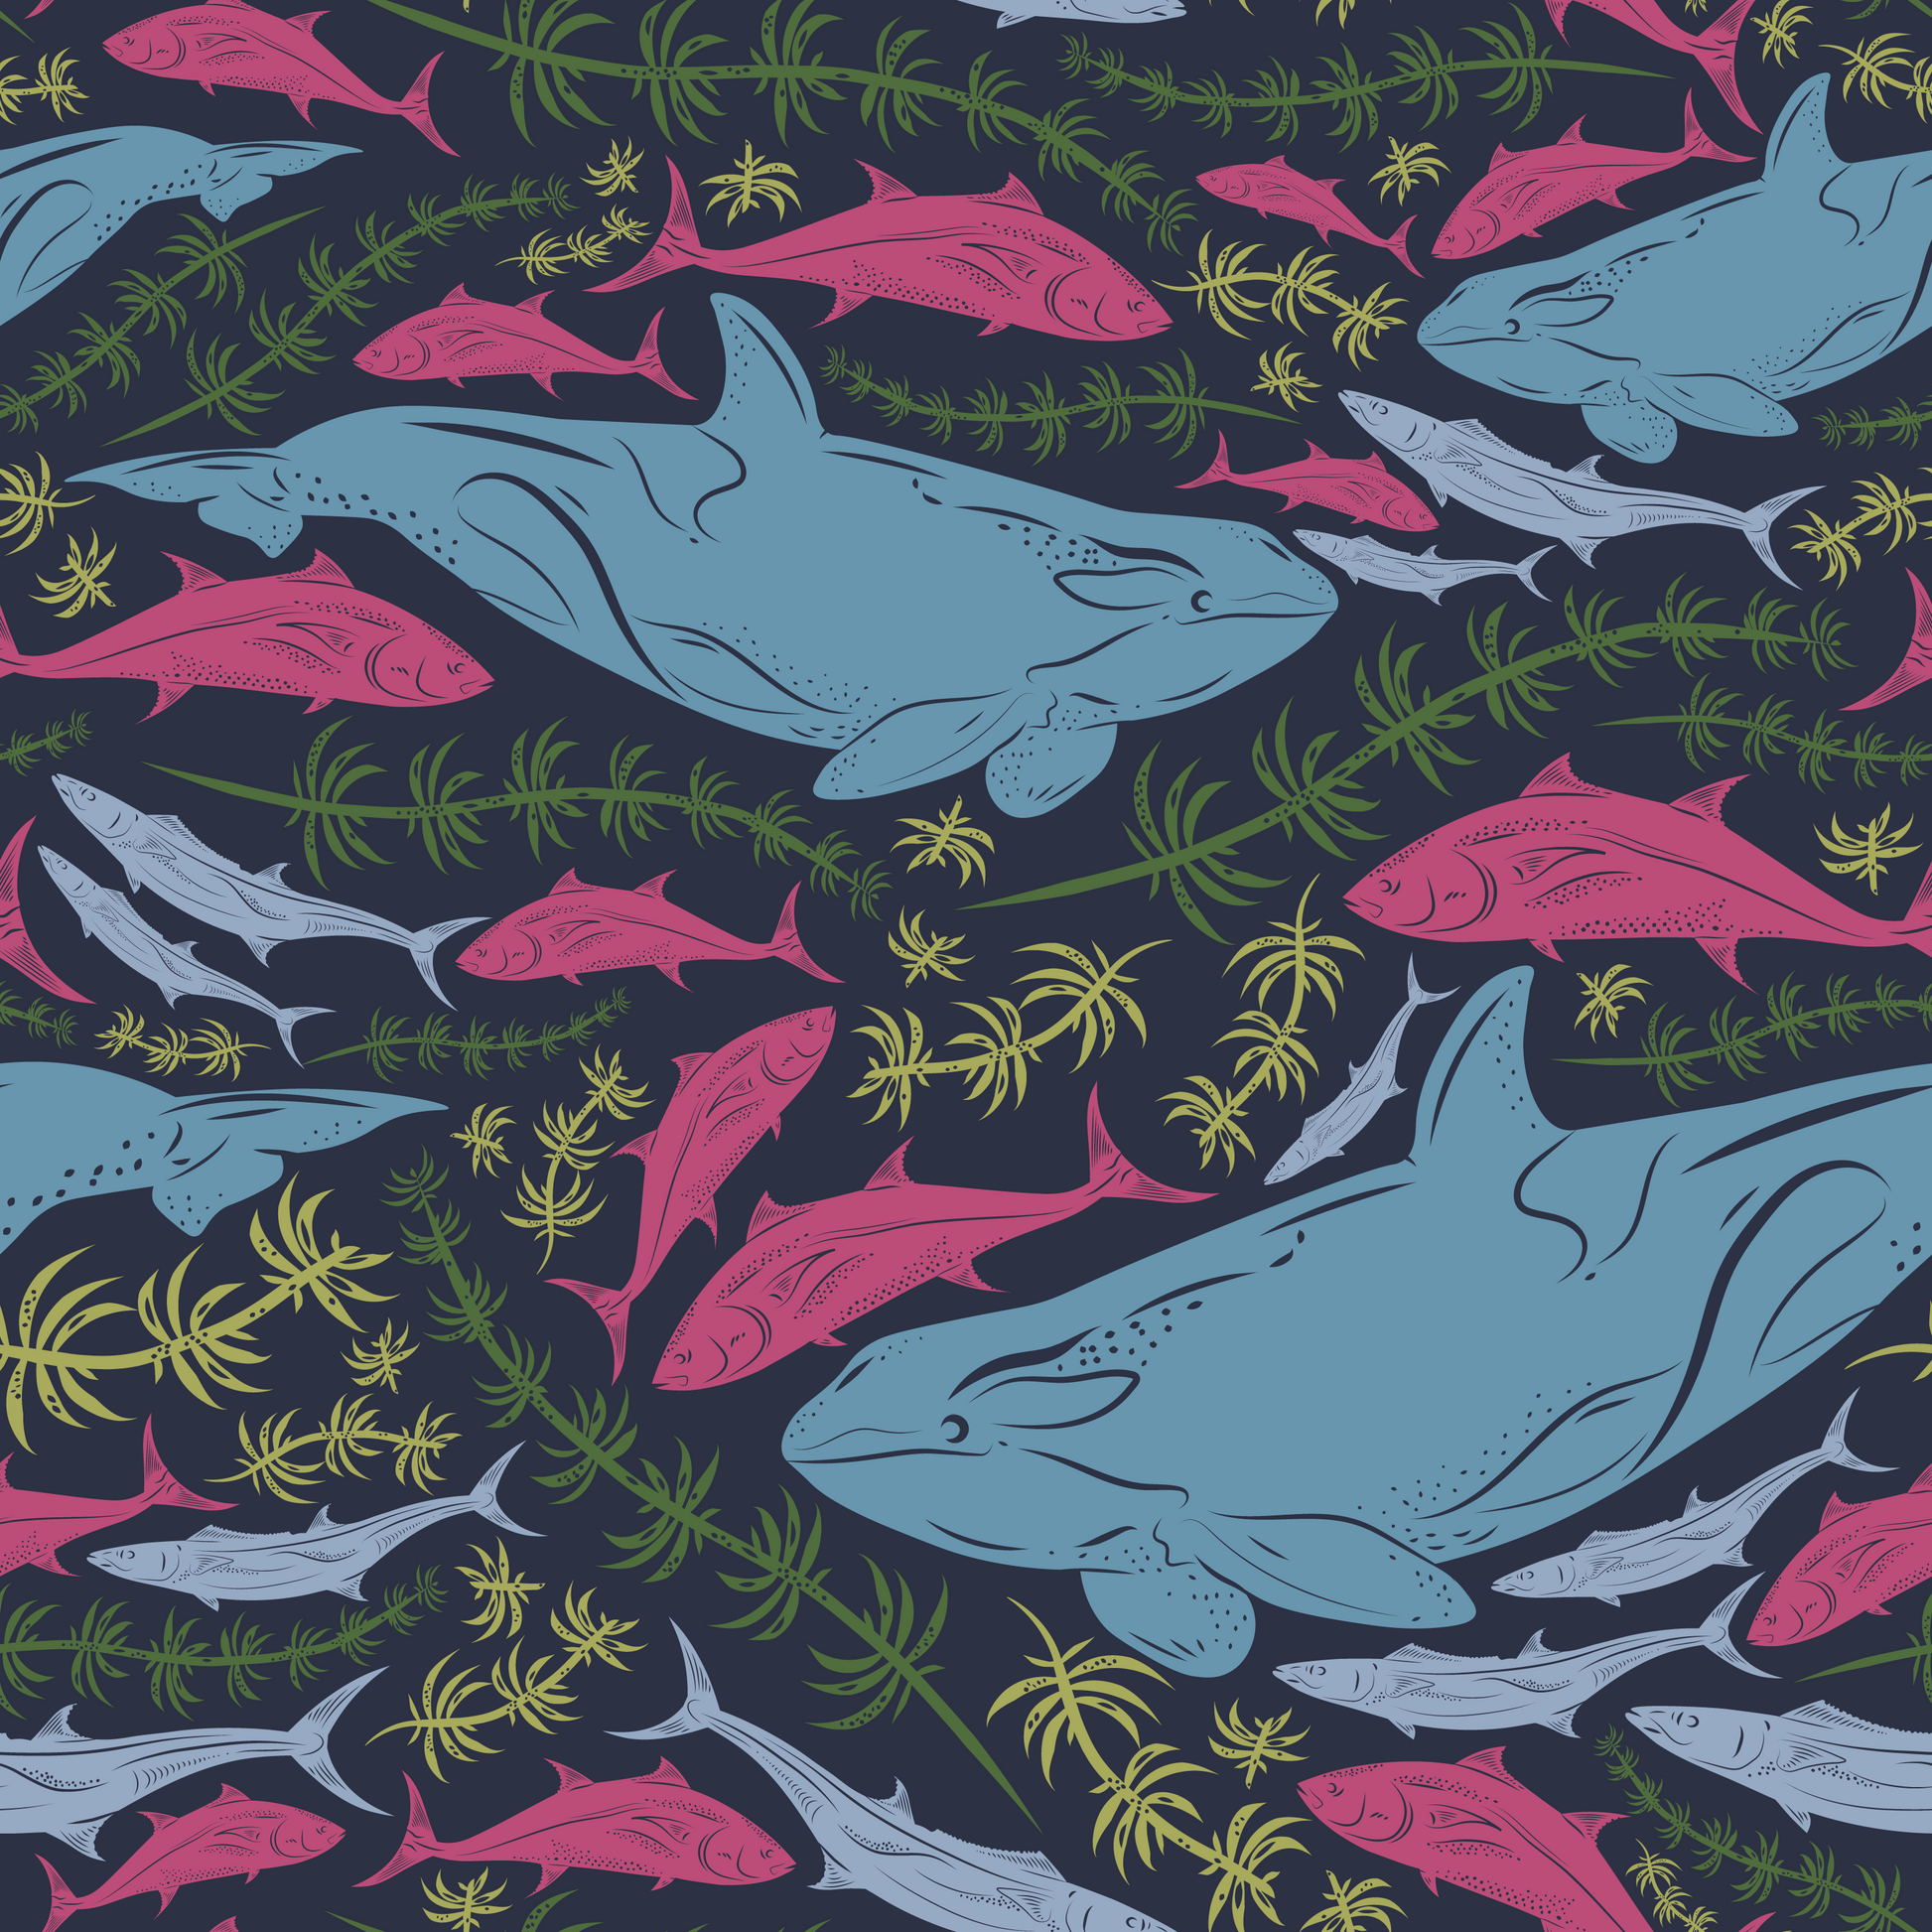 Whales and Fish Towel-Beach Towel-PureDesignTees